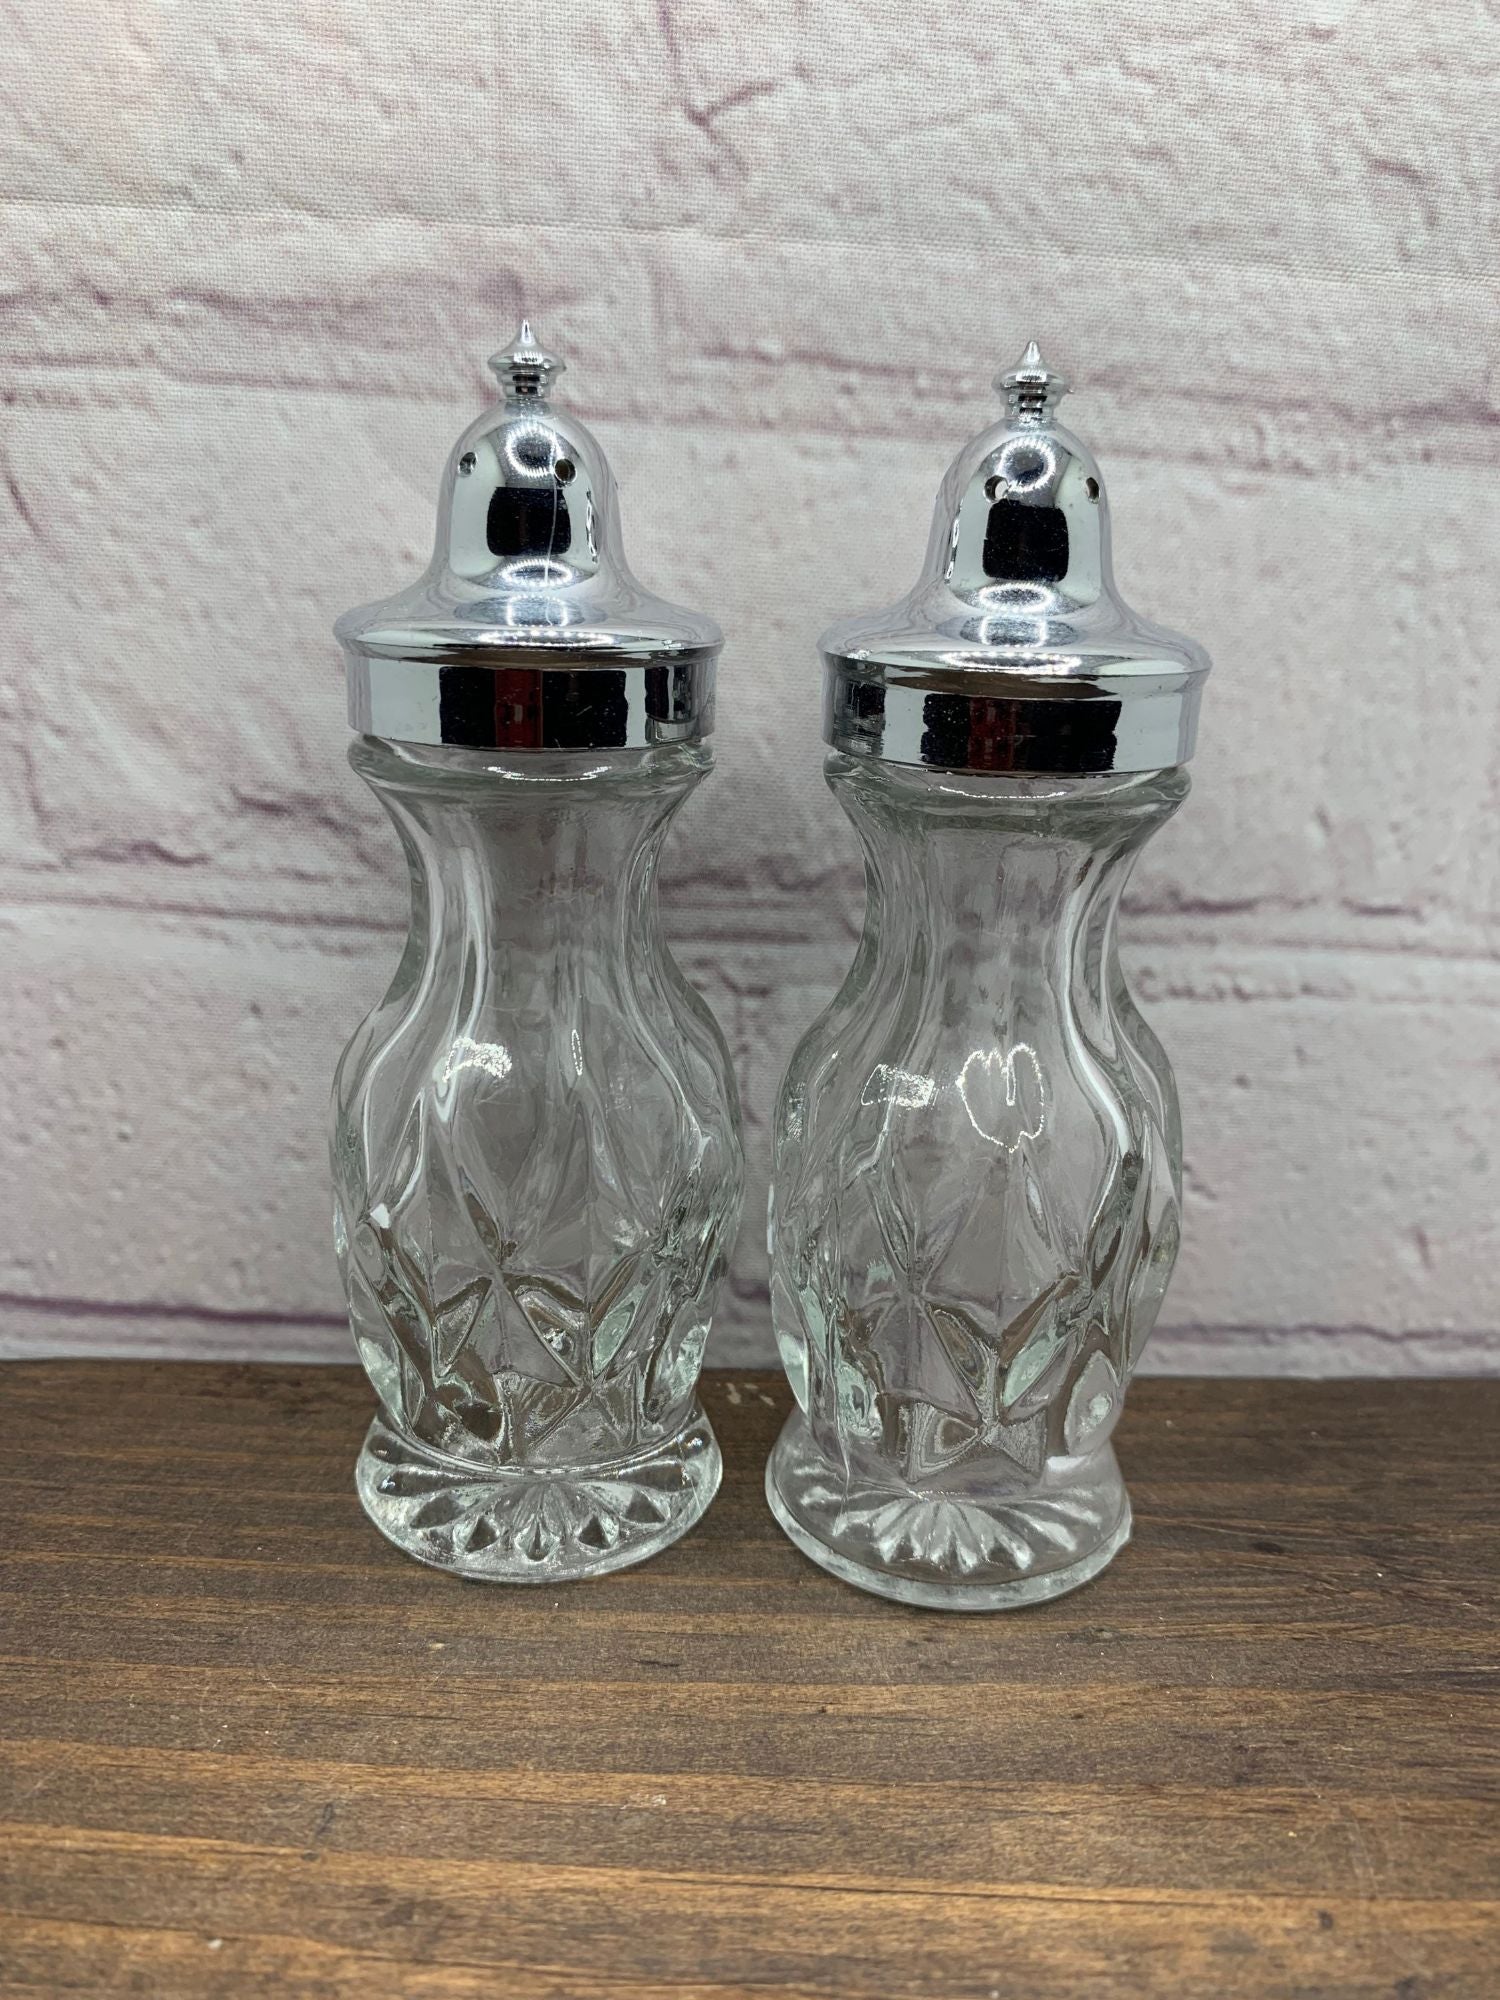 Vintage Anchor Hocking Crown Point Clear Pressed Glass Salt & Pepper Shakers - USA 1970s